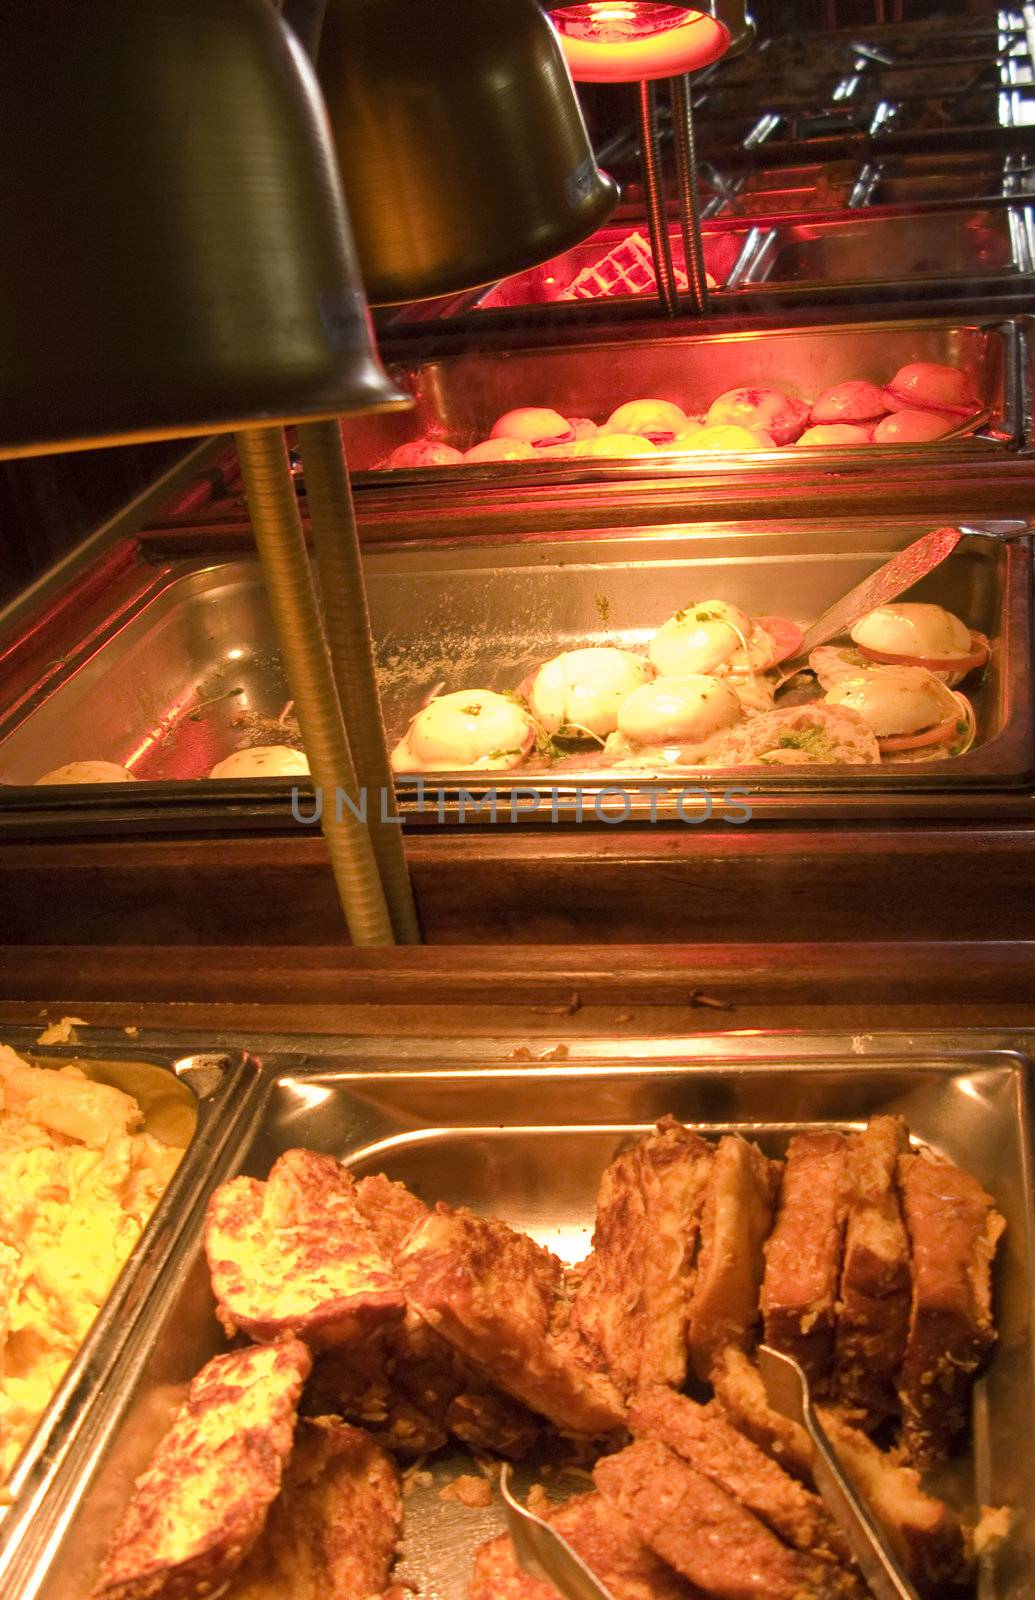 Hot Buffet with Eggs and Bacon at Sunday Brunch